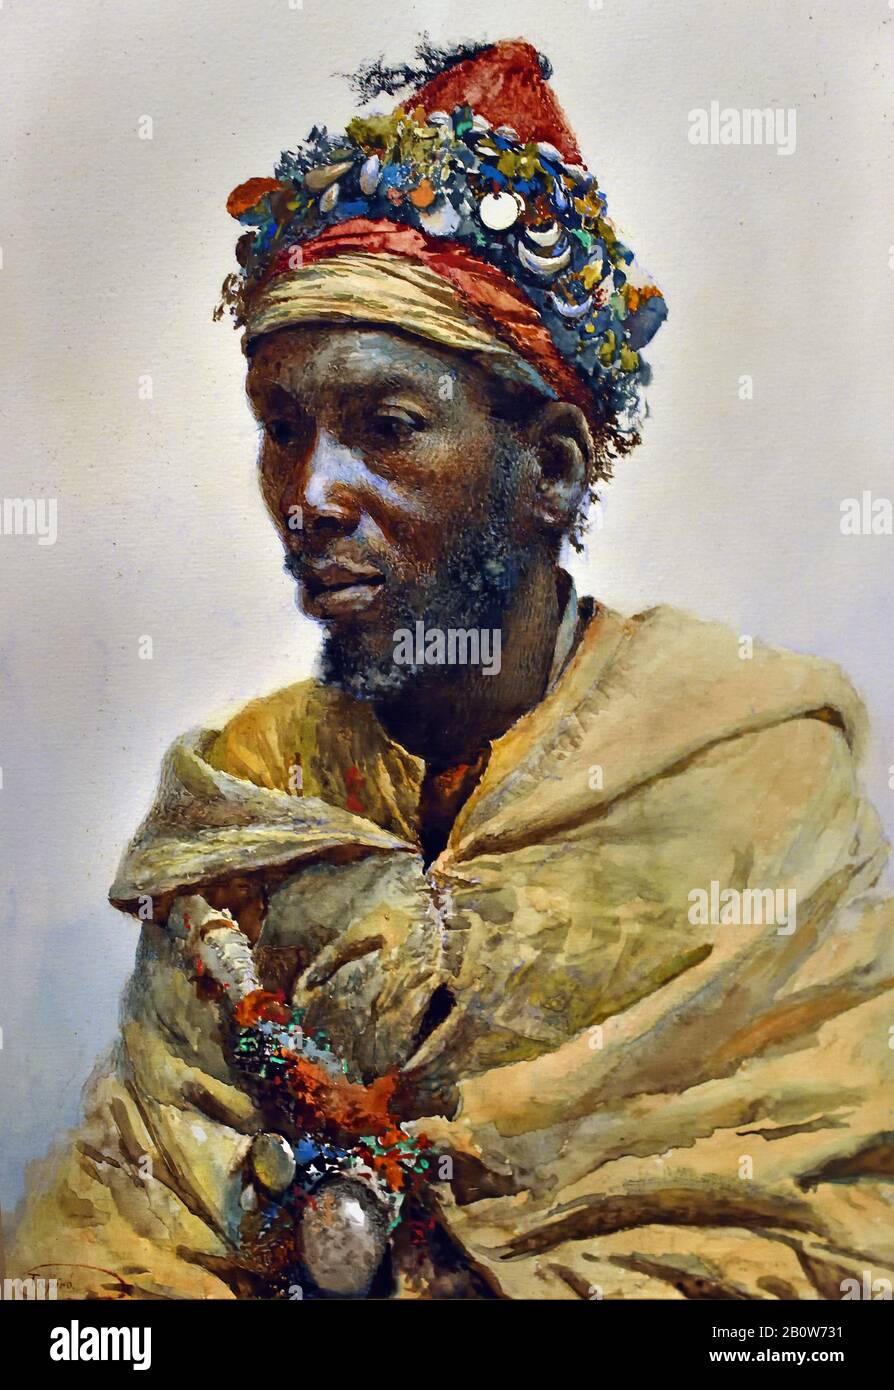 Portrait of a Dervish 1908 by Spanish painter Josep Tapiró i Baró (1836 - 1913 ) Catalan painter known for his watercolor portraits from Morocco. Stock Photo